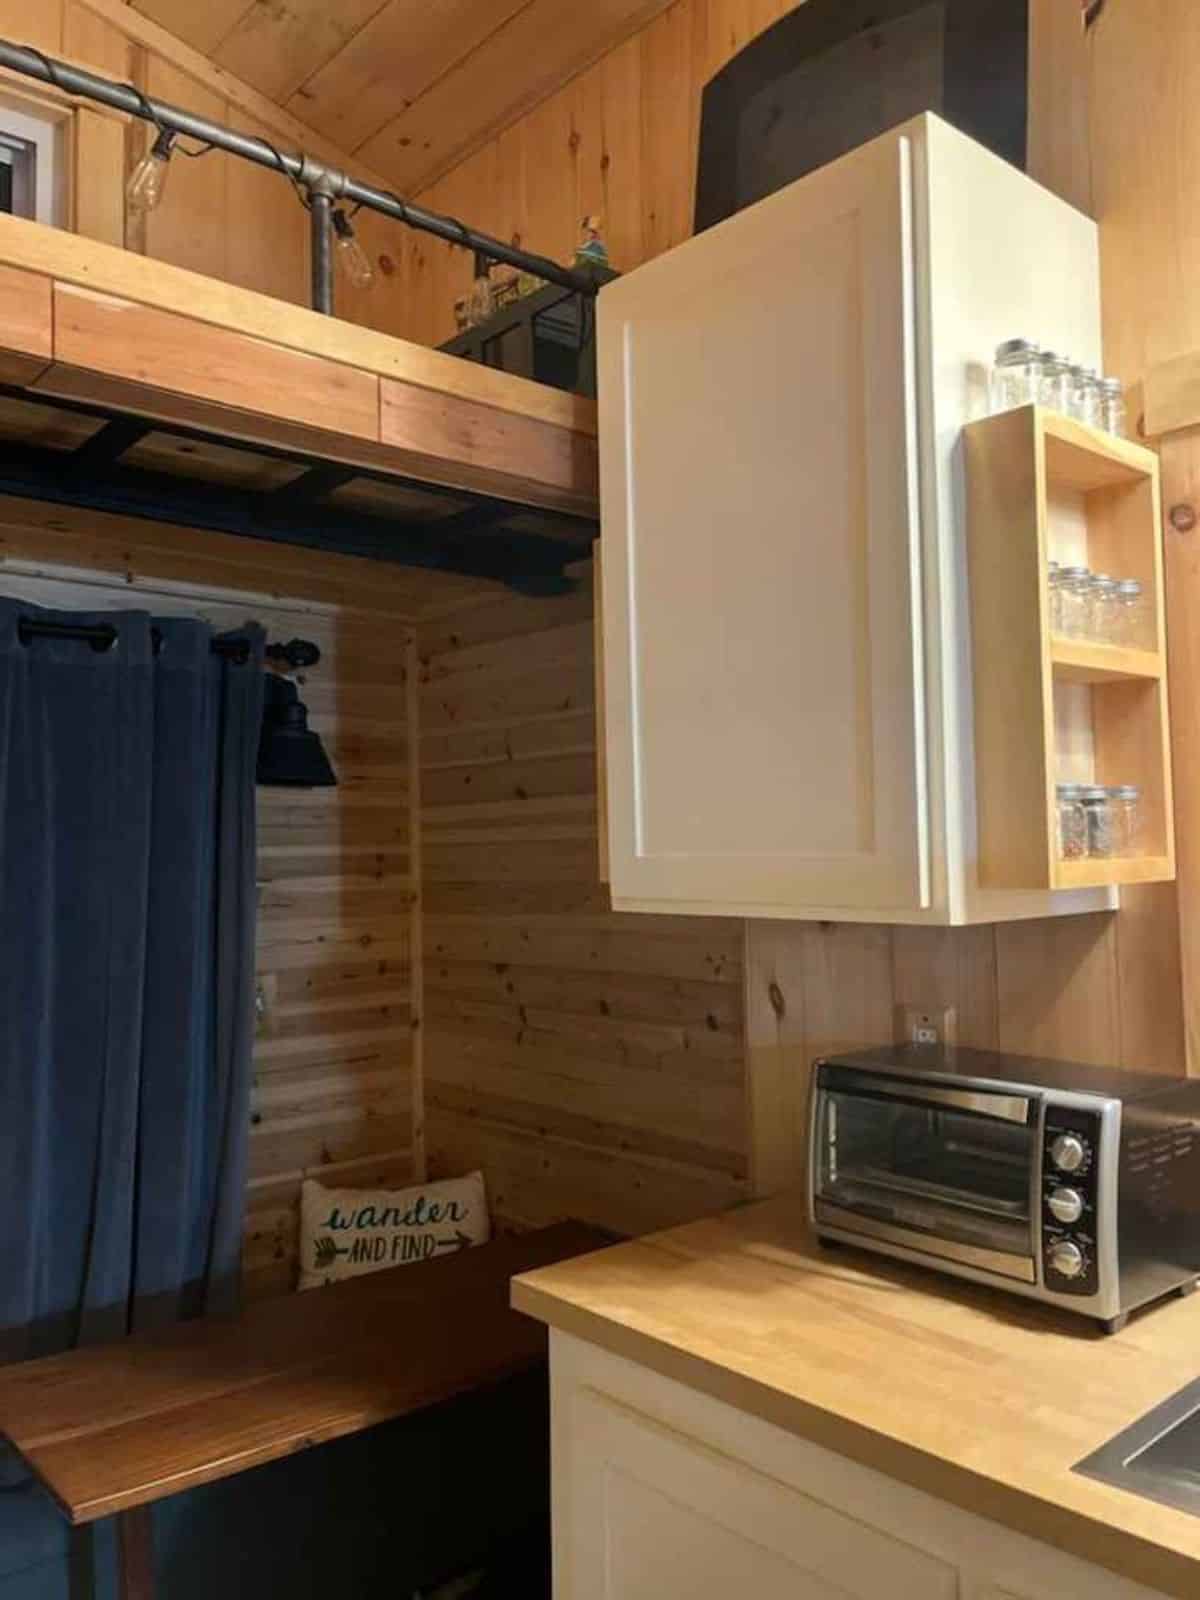 Essential appliances in the kitchen area of 20' Two Bedroom Tiny House